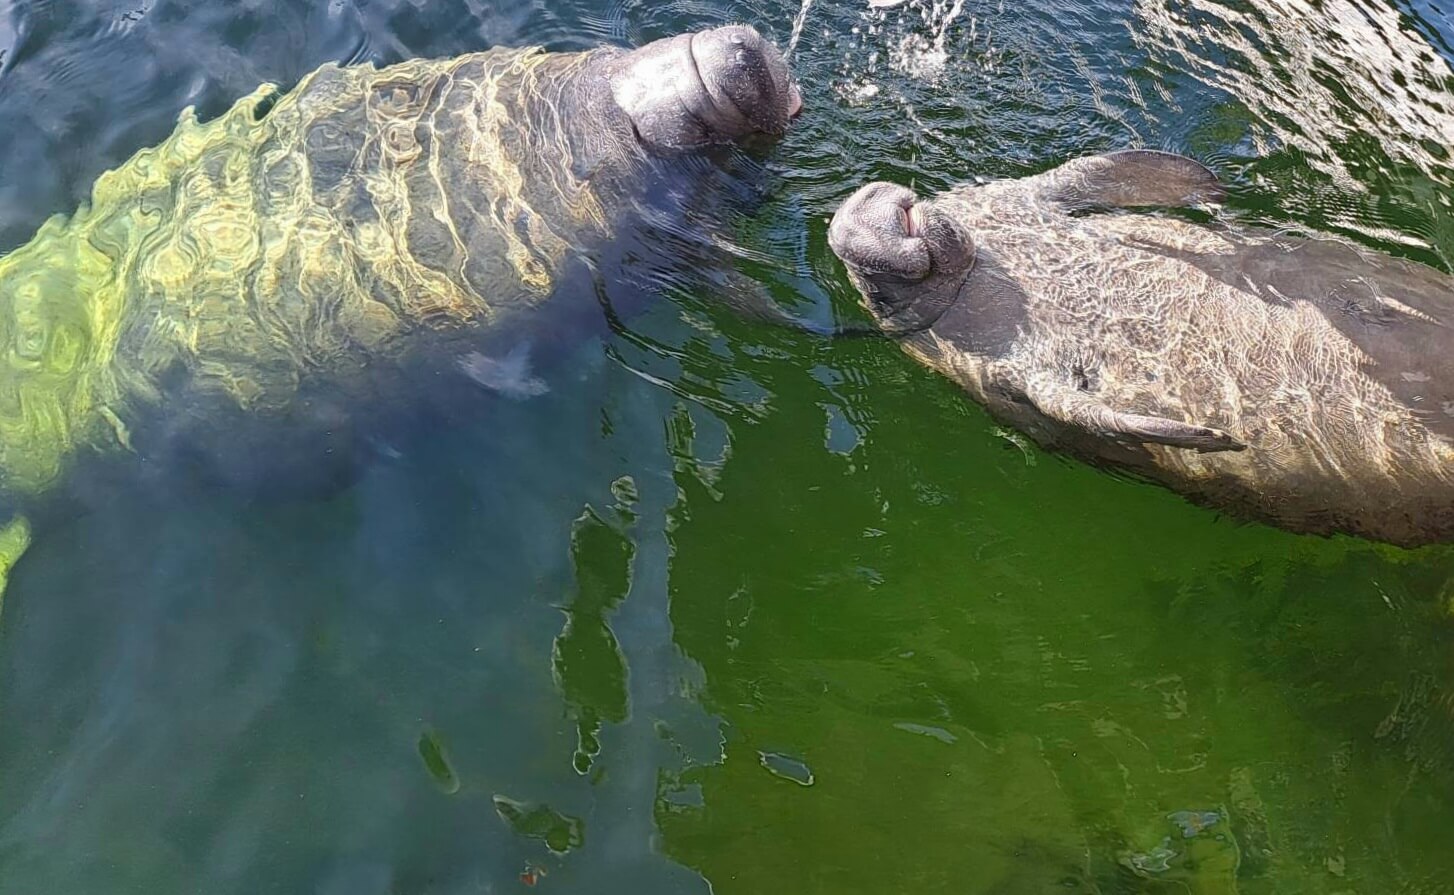 two manatees in the water